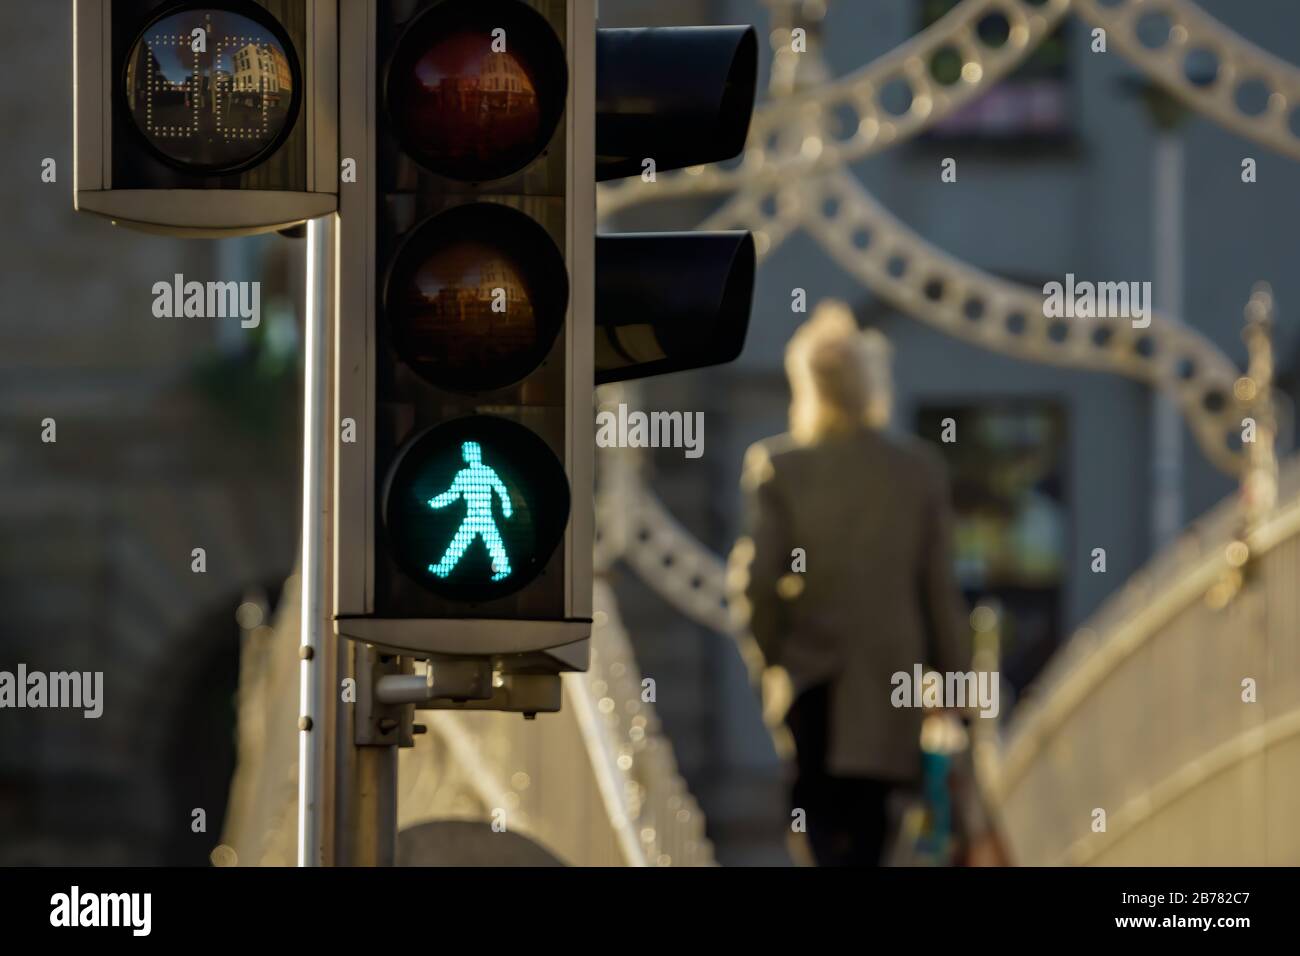 Selective focus on pedestrian traffic lights, buildings reflected in them, green walk sign. Blurred man walking on bridge in background Dublin Ireland Stock Photo